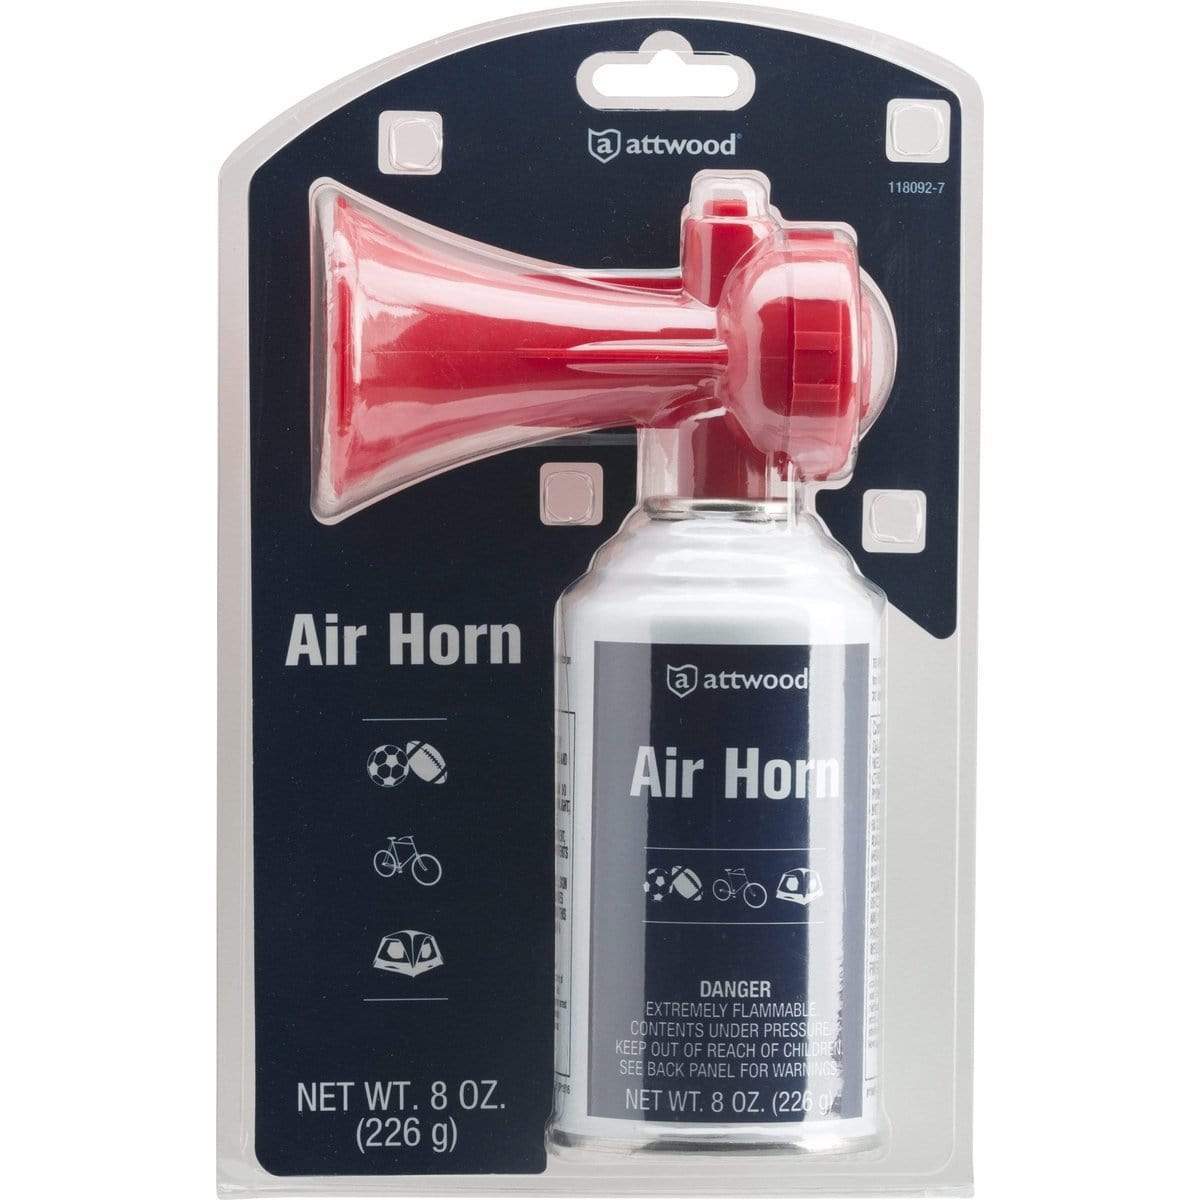 Attwood Marine Qualifies for Free Shipping Attwood Marine Air Horn 8 oz #118092-7